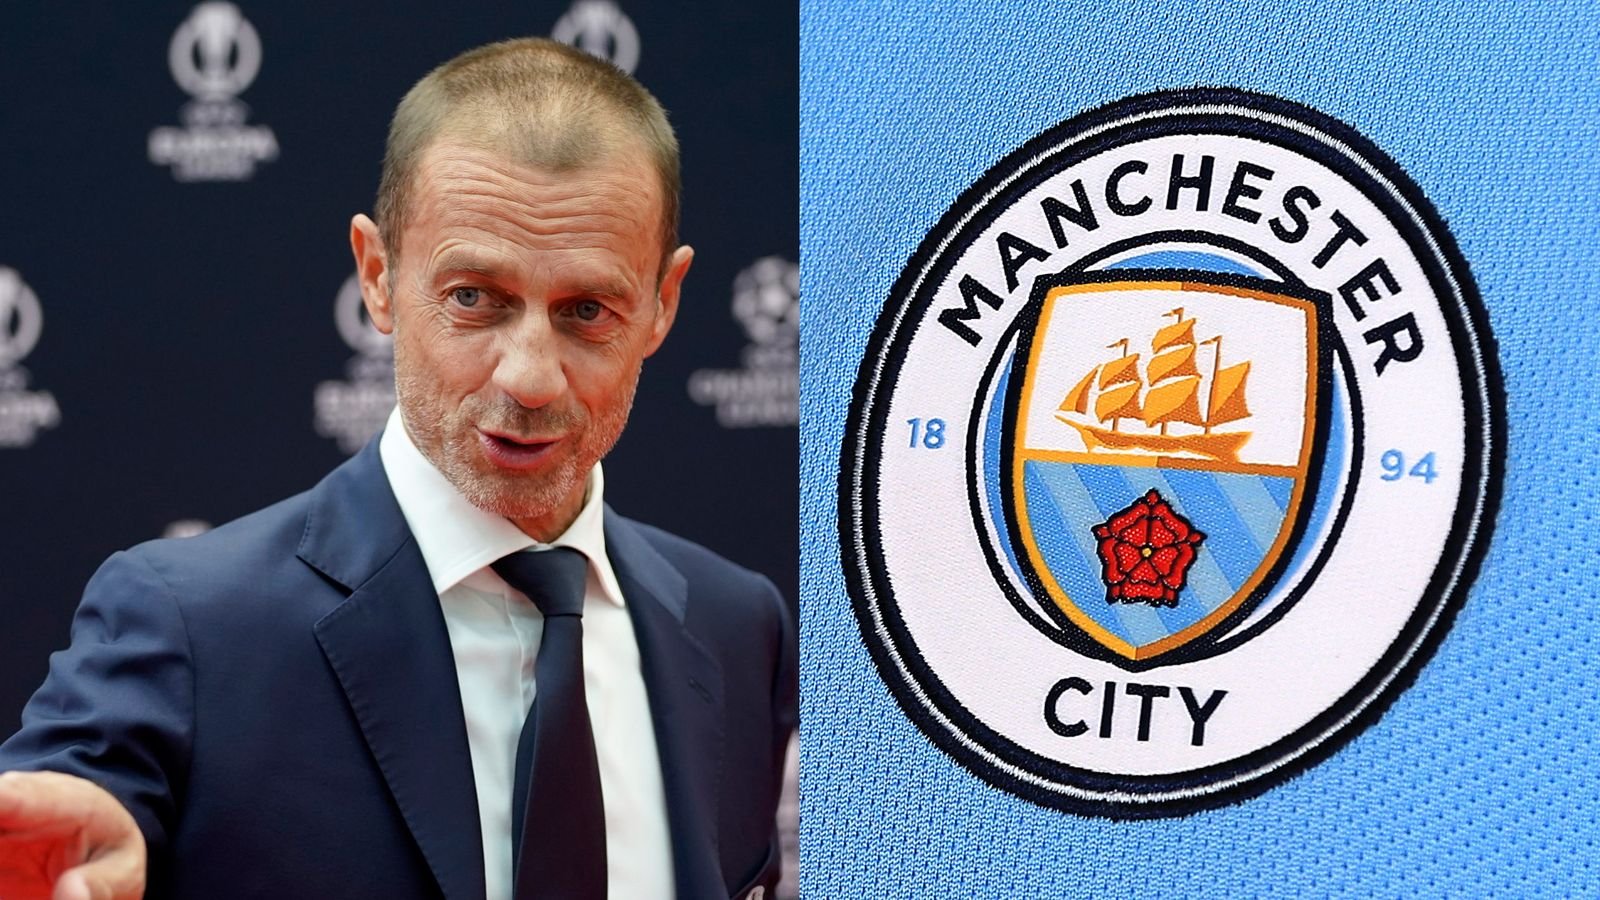 Man City boss Pep Guardiola hits back at UEFA chief Aleksander Ceferin FFP comments: ‘He has to respect the process’ | Football News